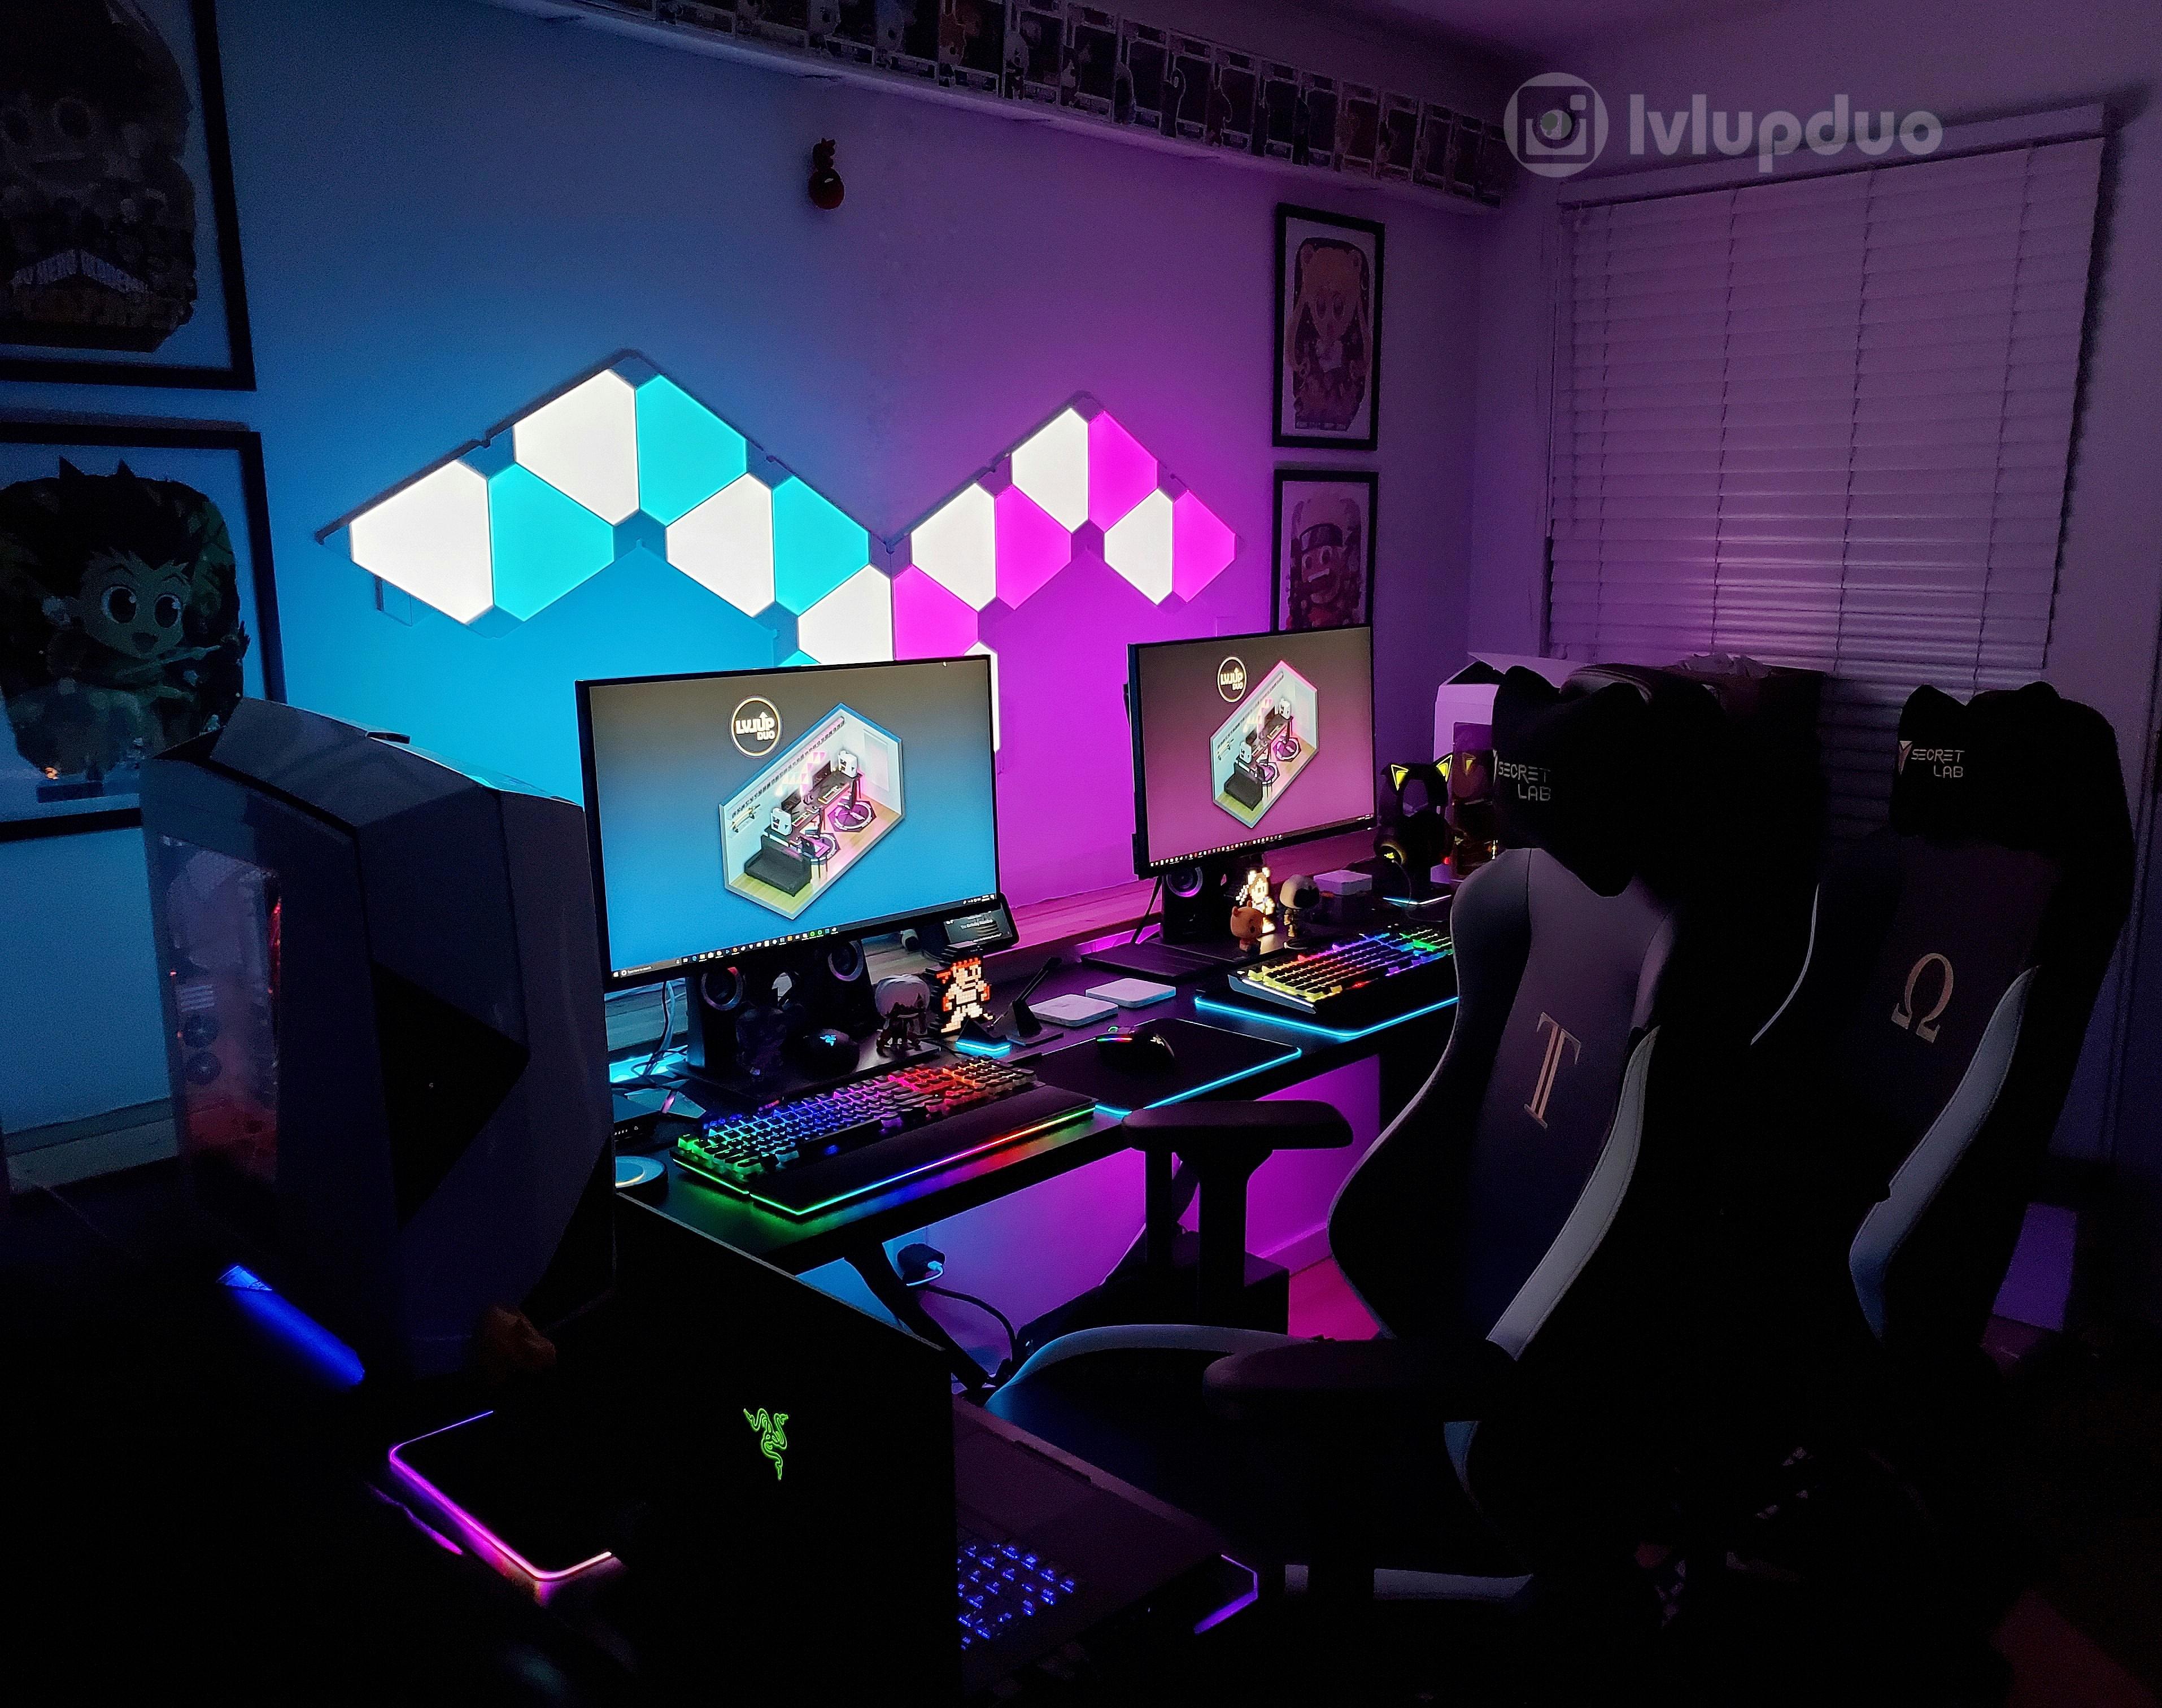 Sharing our battlestation! Desktop wallpaper is the 3D version of our gaming area and a bit of our living room (tv in front of couch is not captured): battlestations